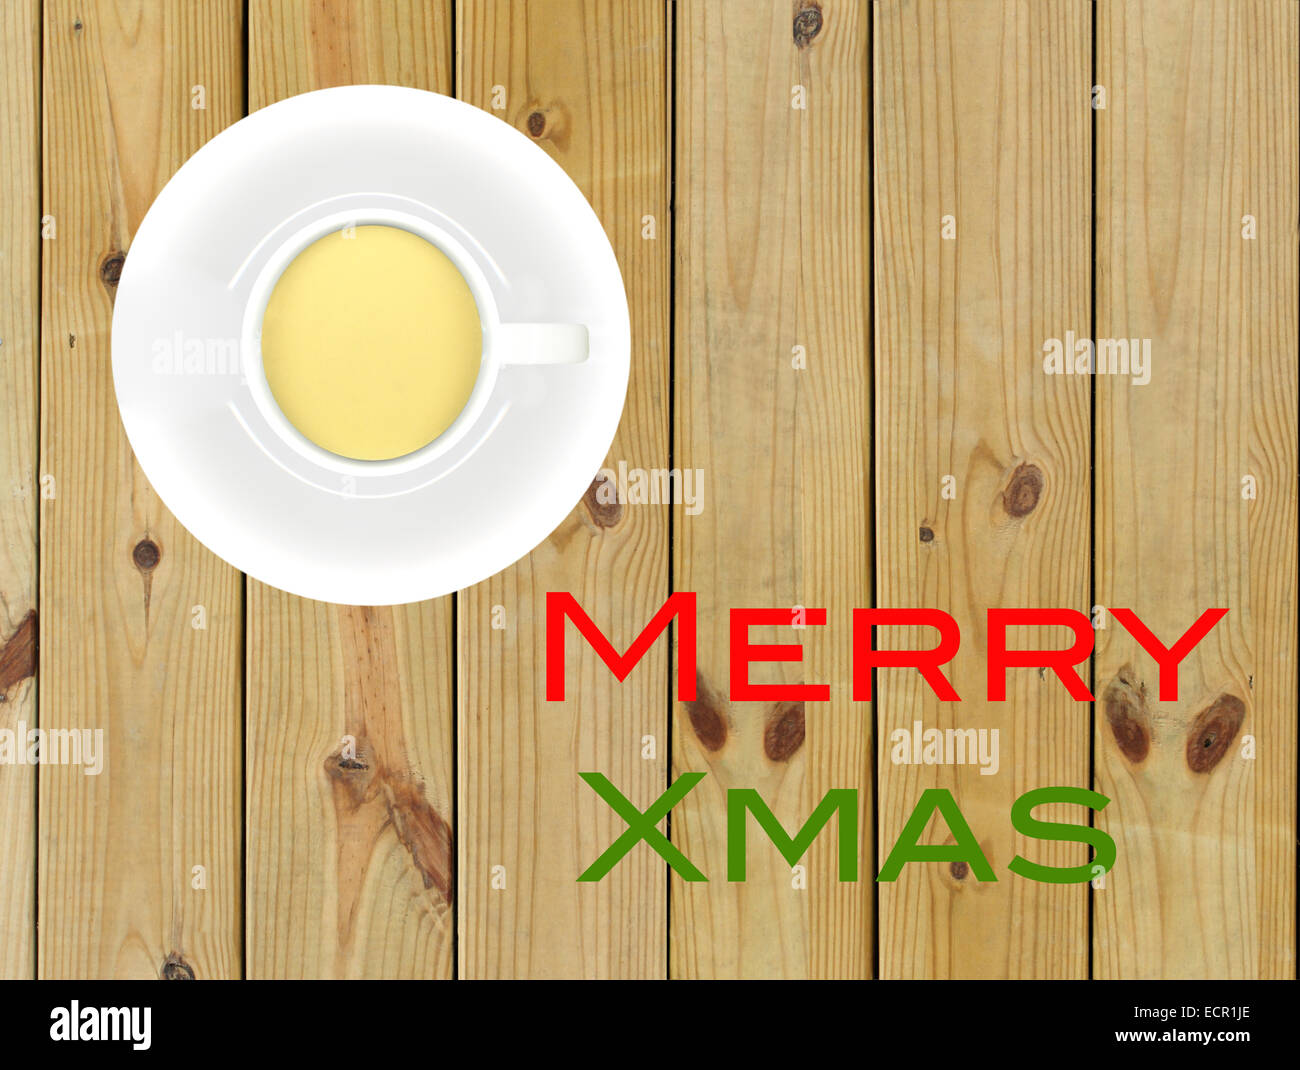 Cup of egg nog and saucer on wood background with words MERRY XMAS in red and green letters. Stock Photo